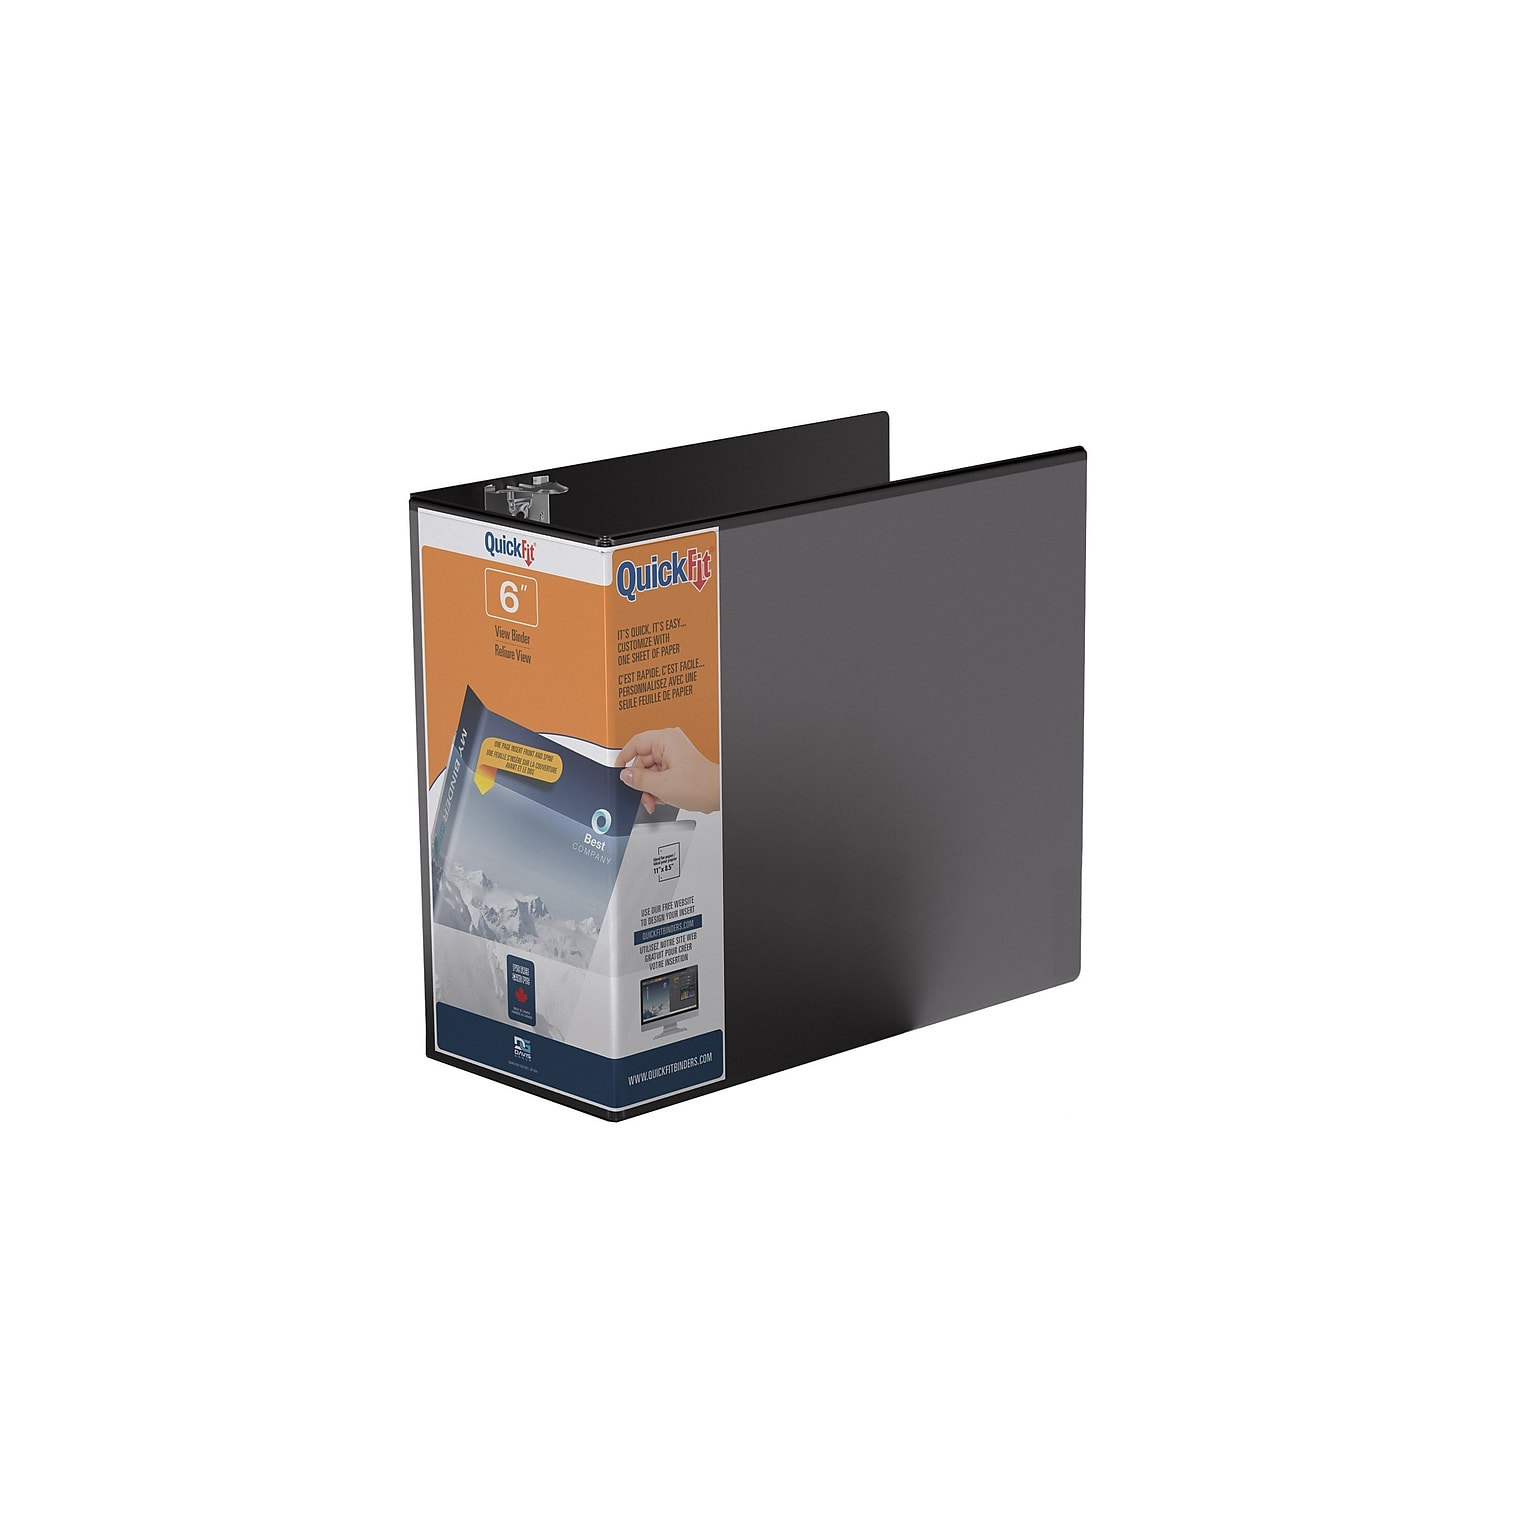 QuickFit Heavy Duty 6 3-Ring View Binders, D-Ring, Black (8708-01)